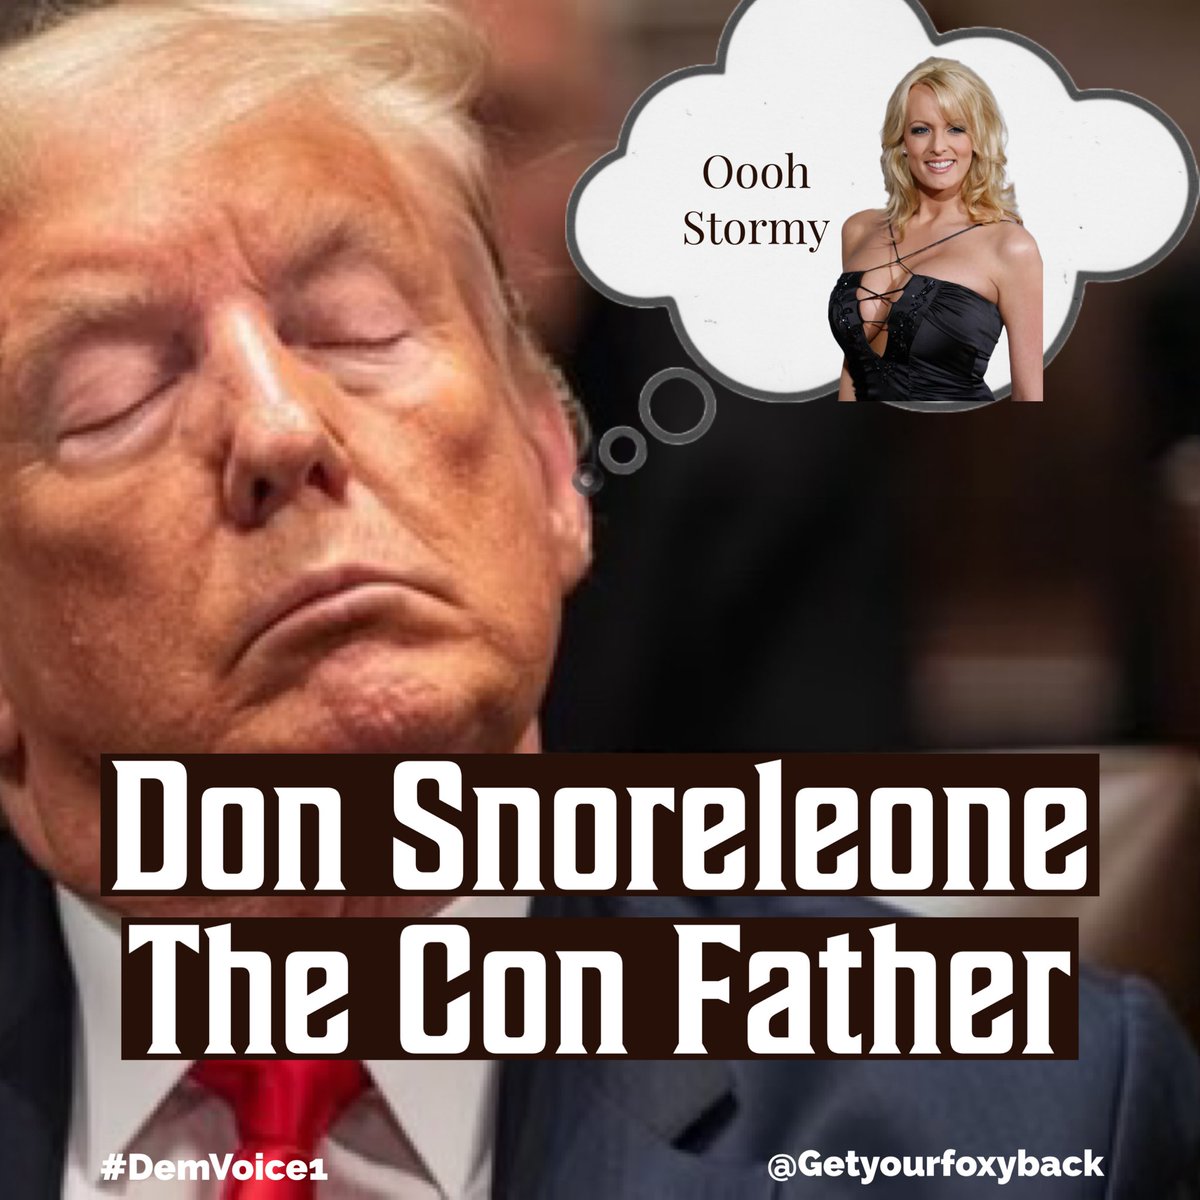 Gee Donnie we so sorry these proceedings are boring you so much Who’s too sleepy to get the job done?? #DonSnoreleone #SleepyDonald